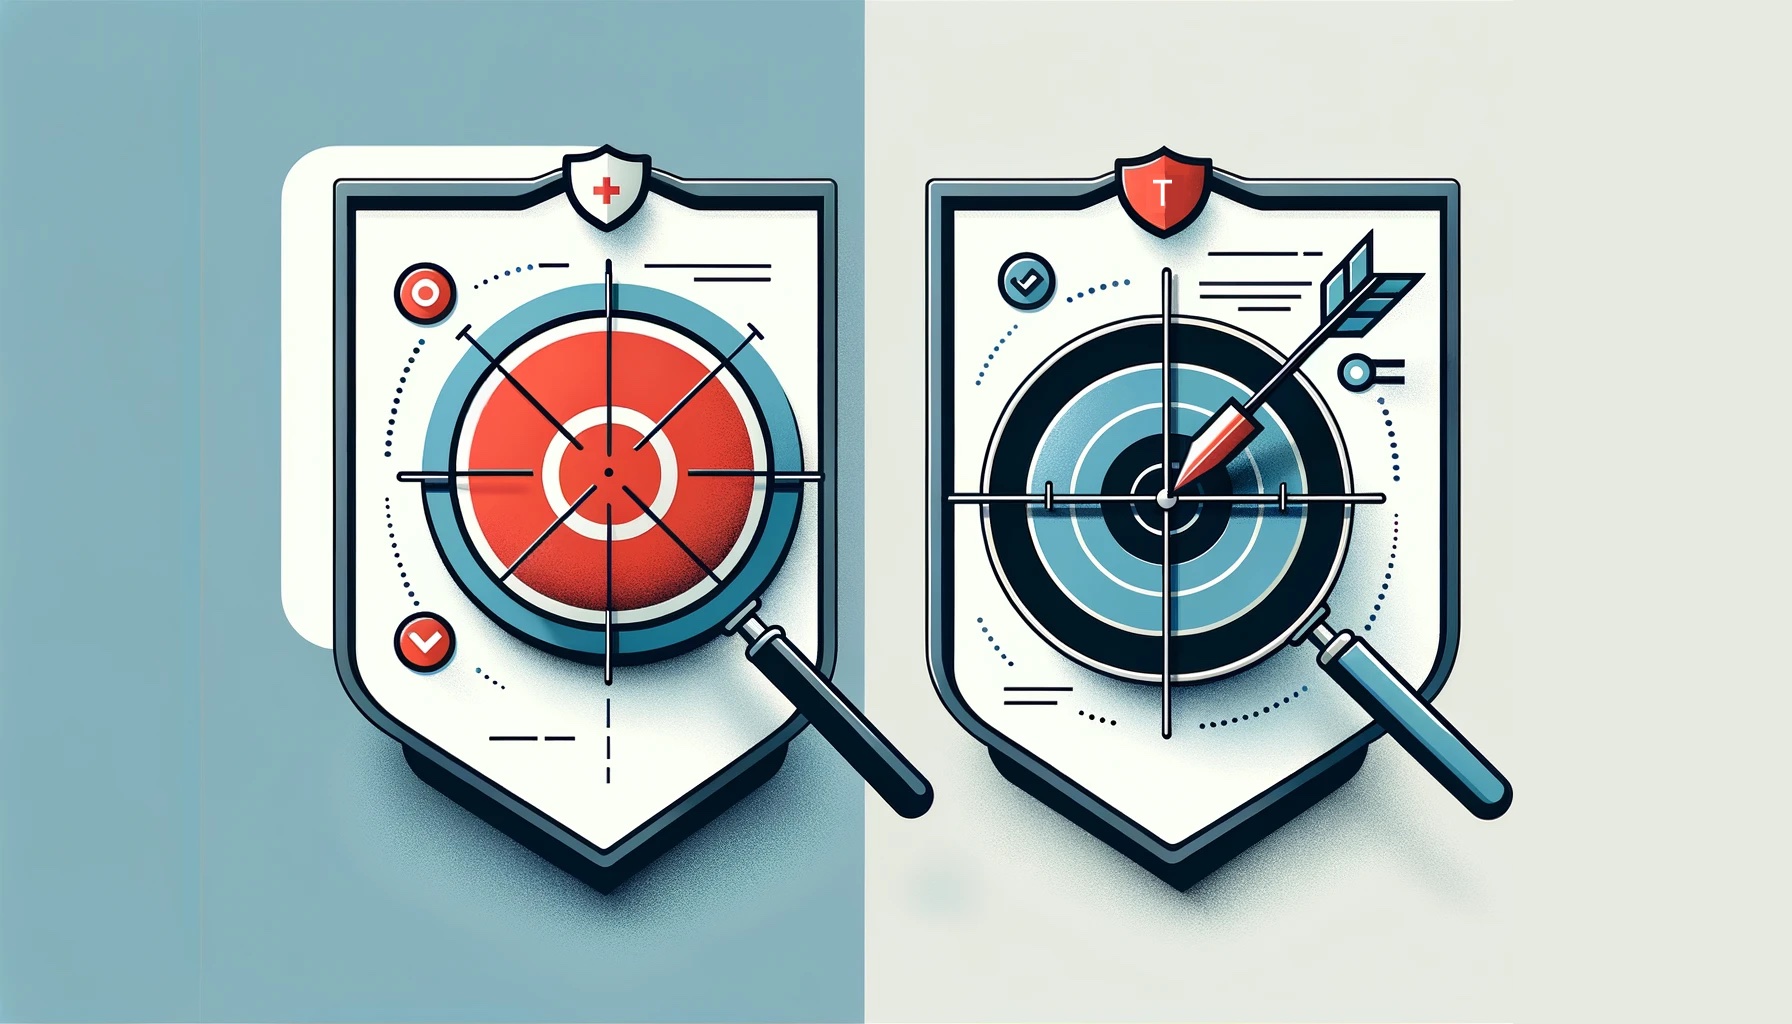 Block icon with shield on left and target icon with bullseye on right